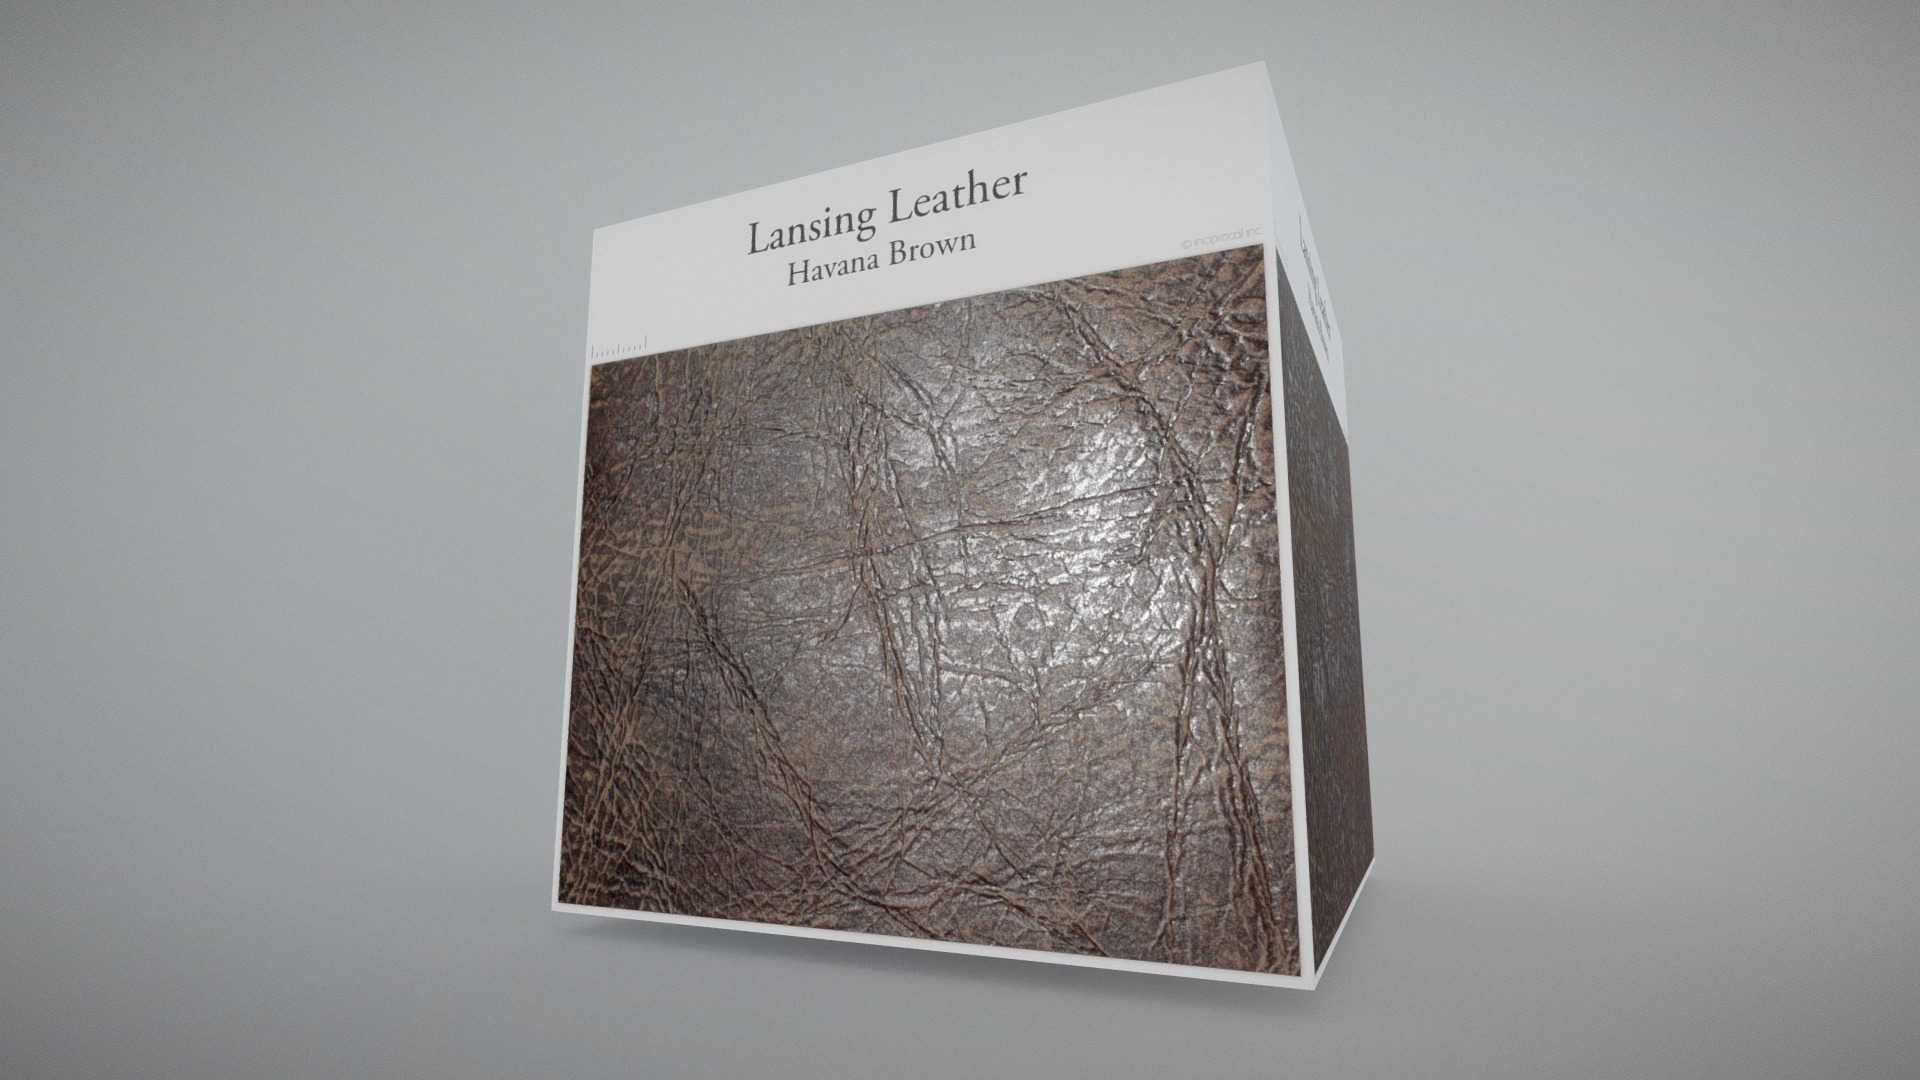 3D model Lansing Leather (Havana Brown) - This is a 3D model of the Lansing Leather (Havana Brown). The 3D model is about a sketch of a tree.